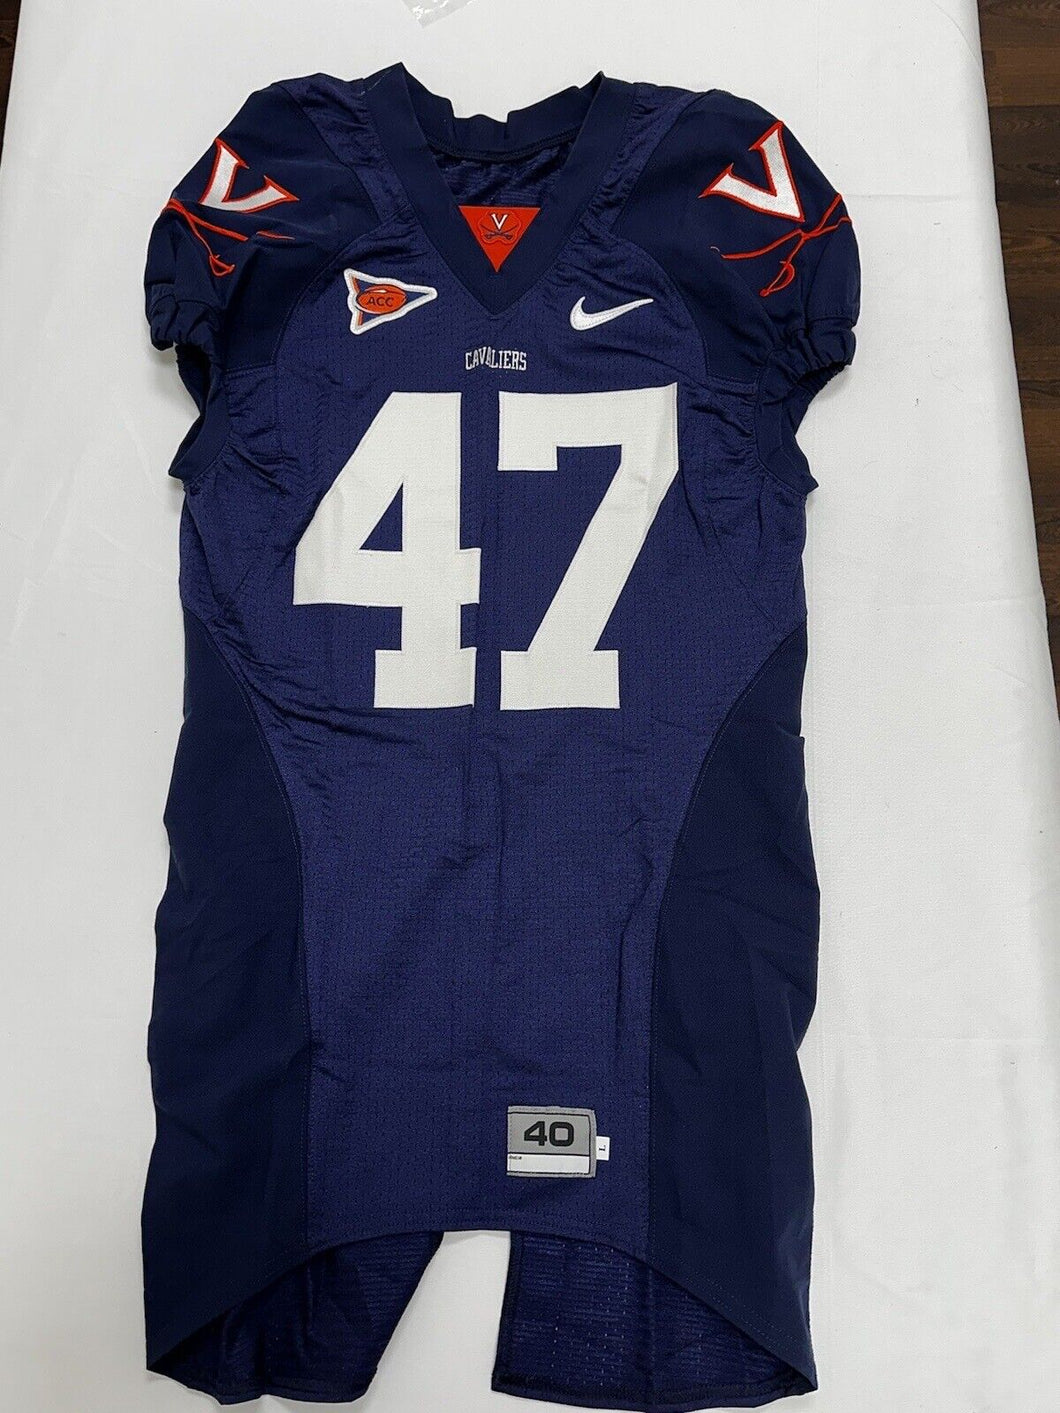 UVA Cavaliers Team Issued / Game Worn Nike Football Jersey - Size 40LINE #47